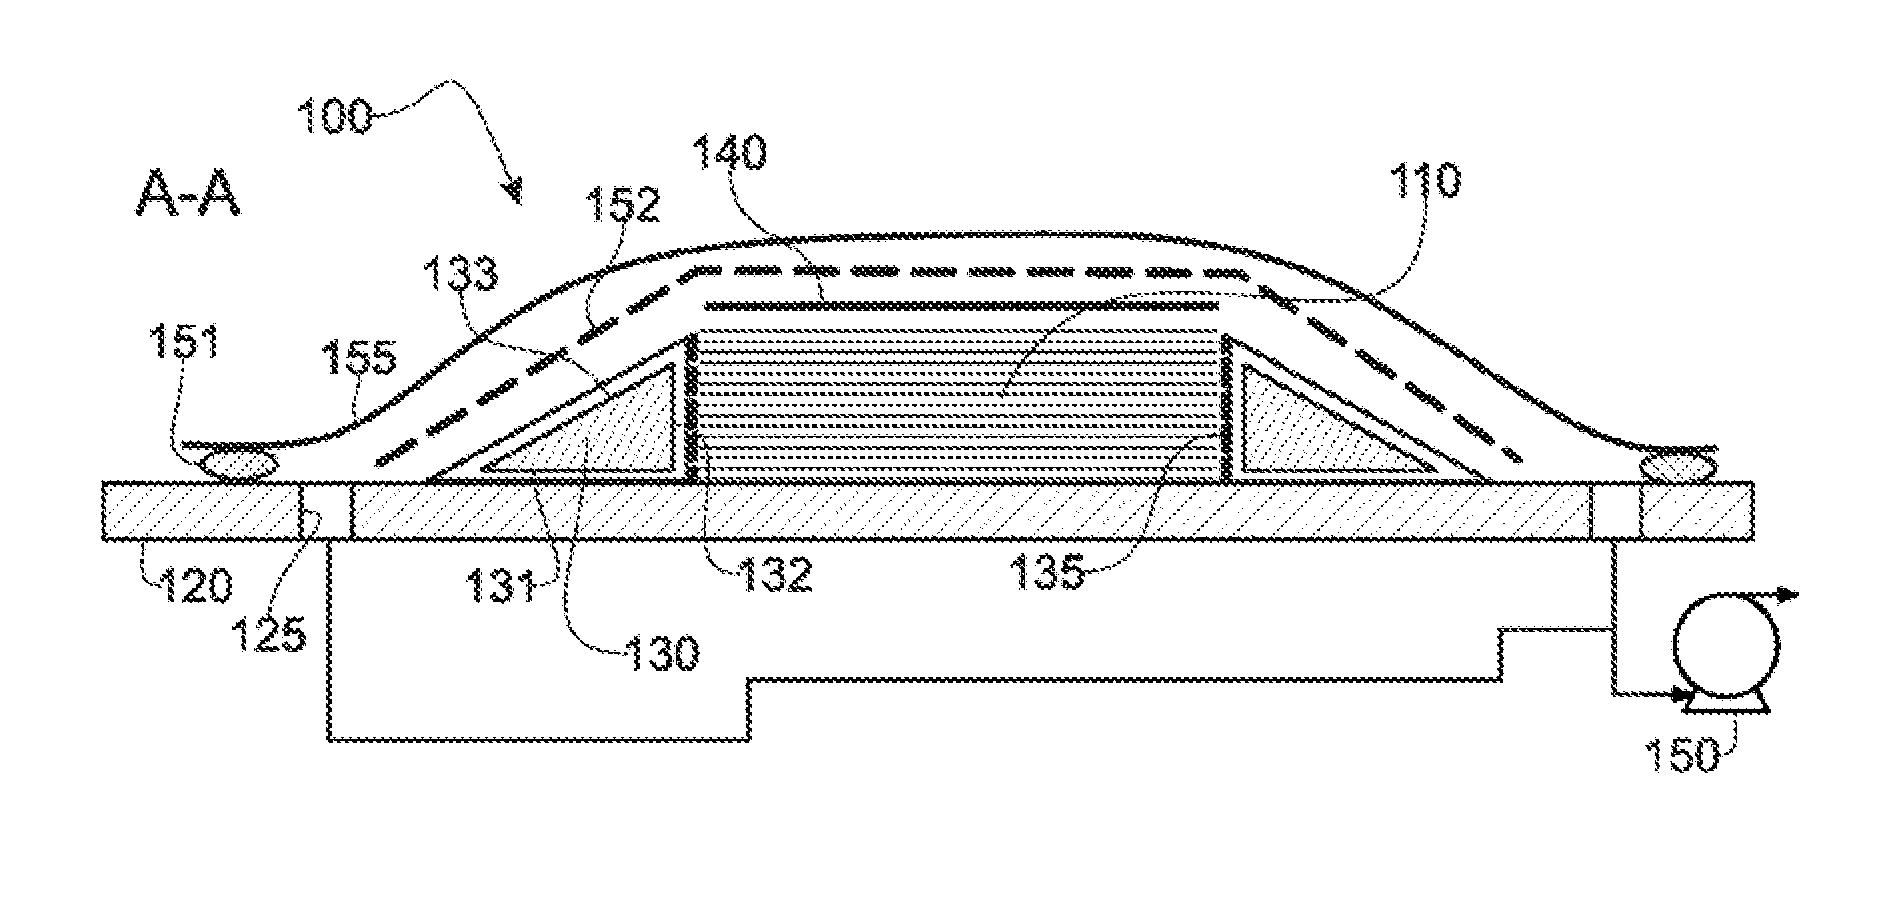 Method and device for compacting and consolidating a thick composite panel having a thermoplastic matrix